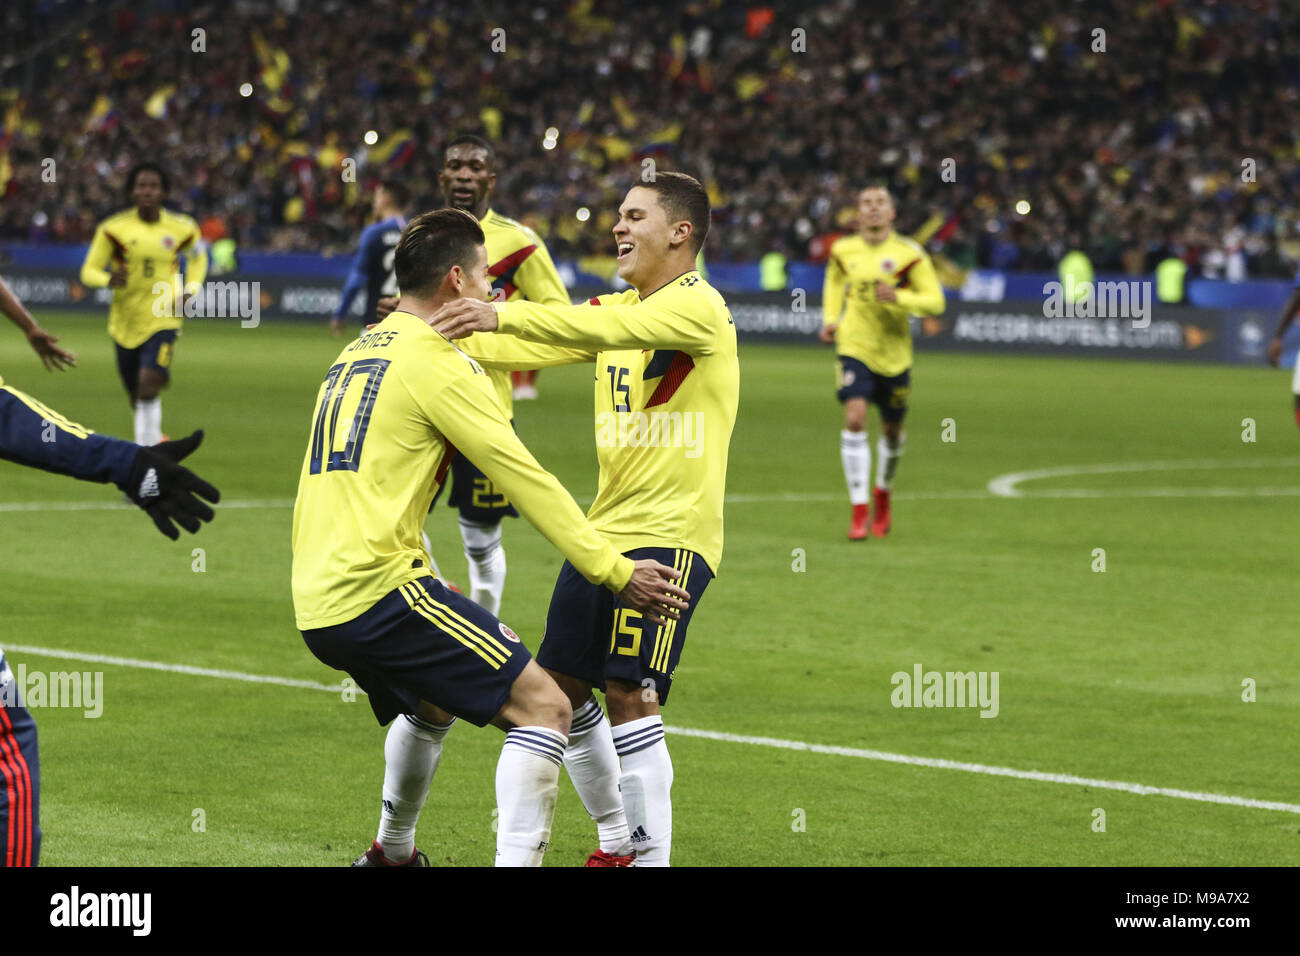 Paris, France. 23rd Mar, 2018. Juan Fernando Quintero and James Rodriguez celebrate a goal during the friendly football match between France and Colombia at the Stade de France, in Saint-Denis, on the outskirts of Paris.final score Credit: Elyxandro Cegarra/SOPA Images/ZUMA Wire/Alamy Live News Stock Photo